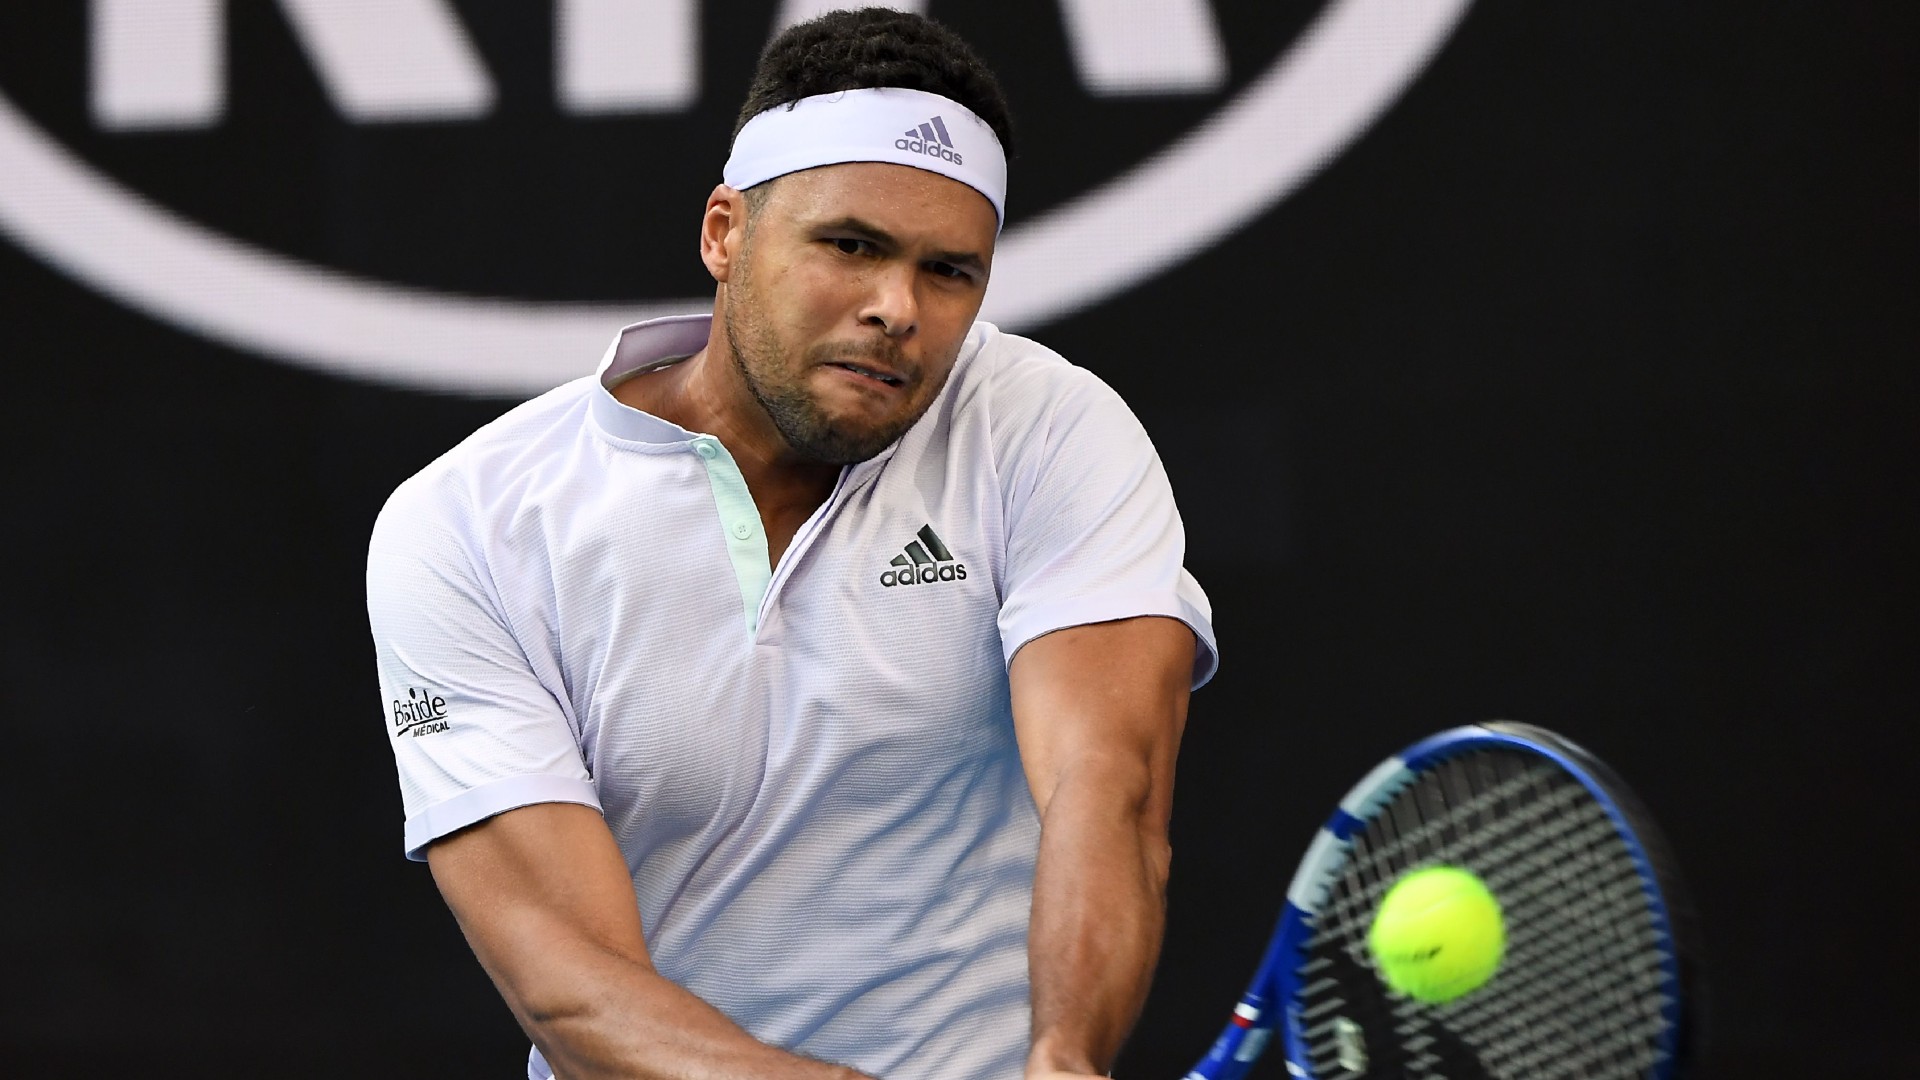 There was no victorious return for Jo-Wilfried Tsonga as he made his comeback from injury with a loss to Sebastian Korda.